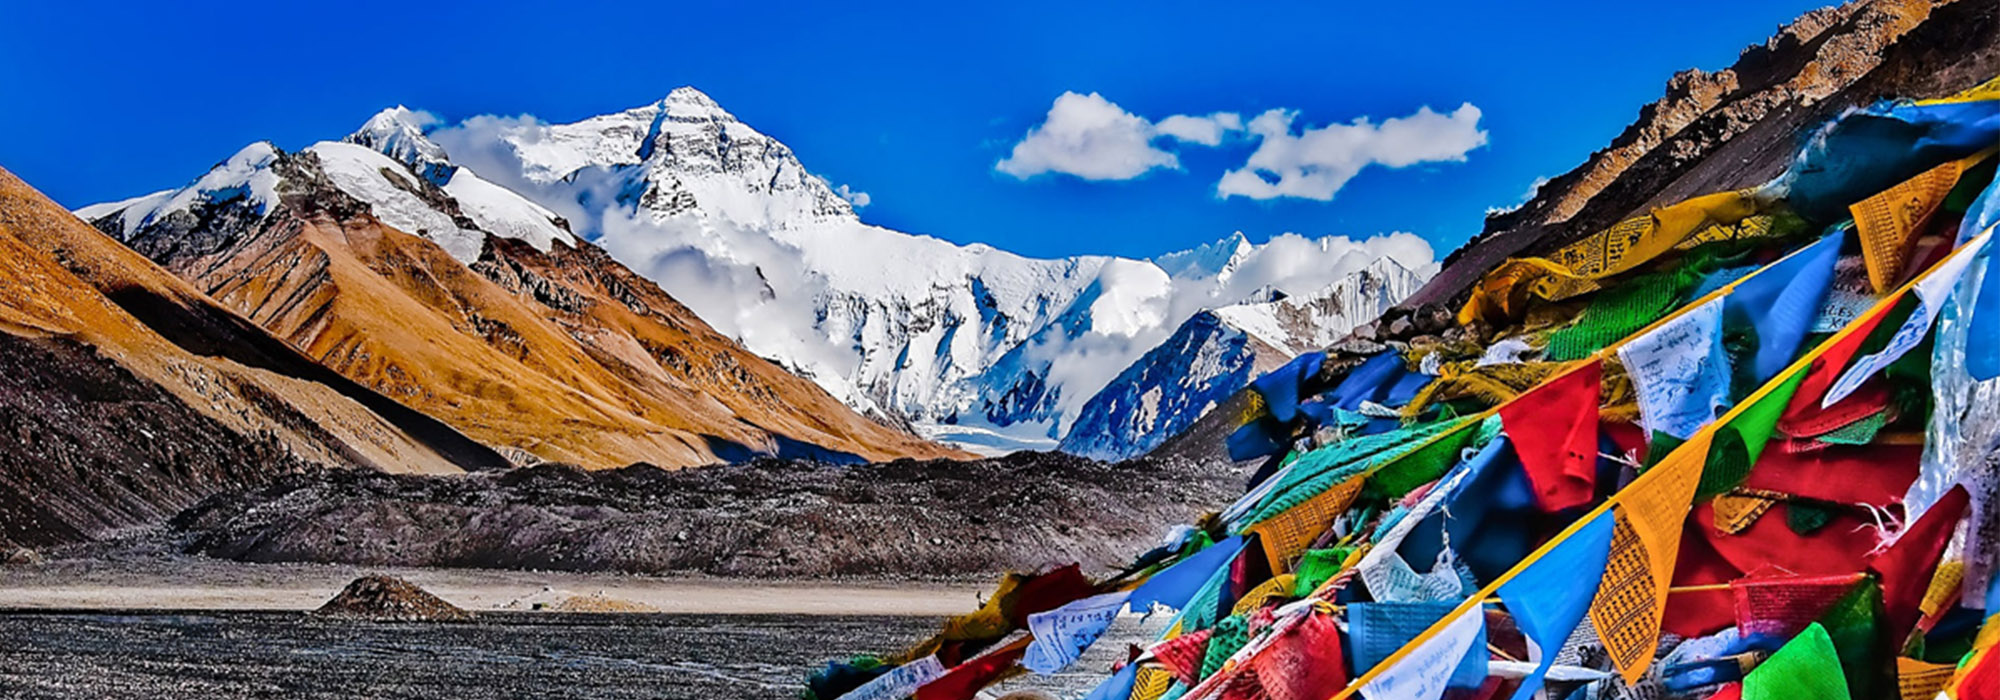 SIGNIFICANCE OF PRAYER FLAGS IN BHUTAN